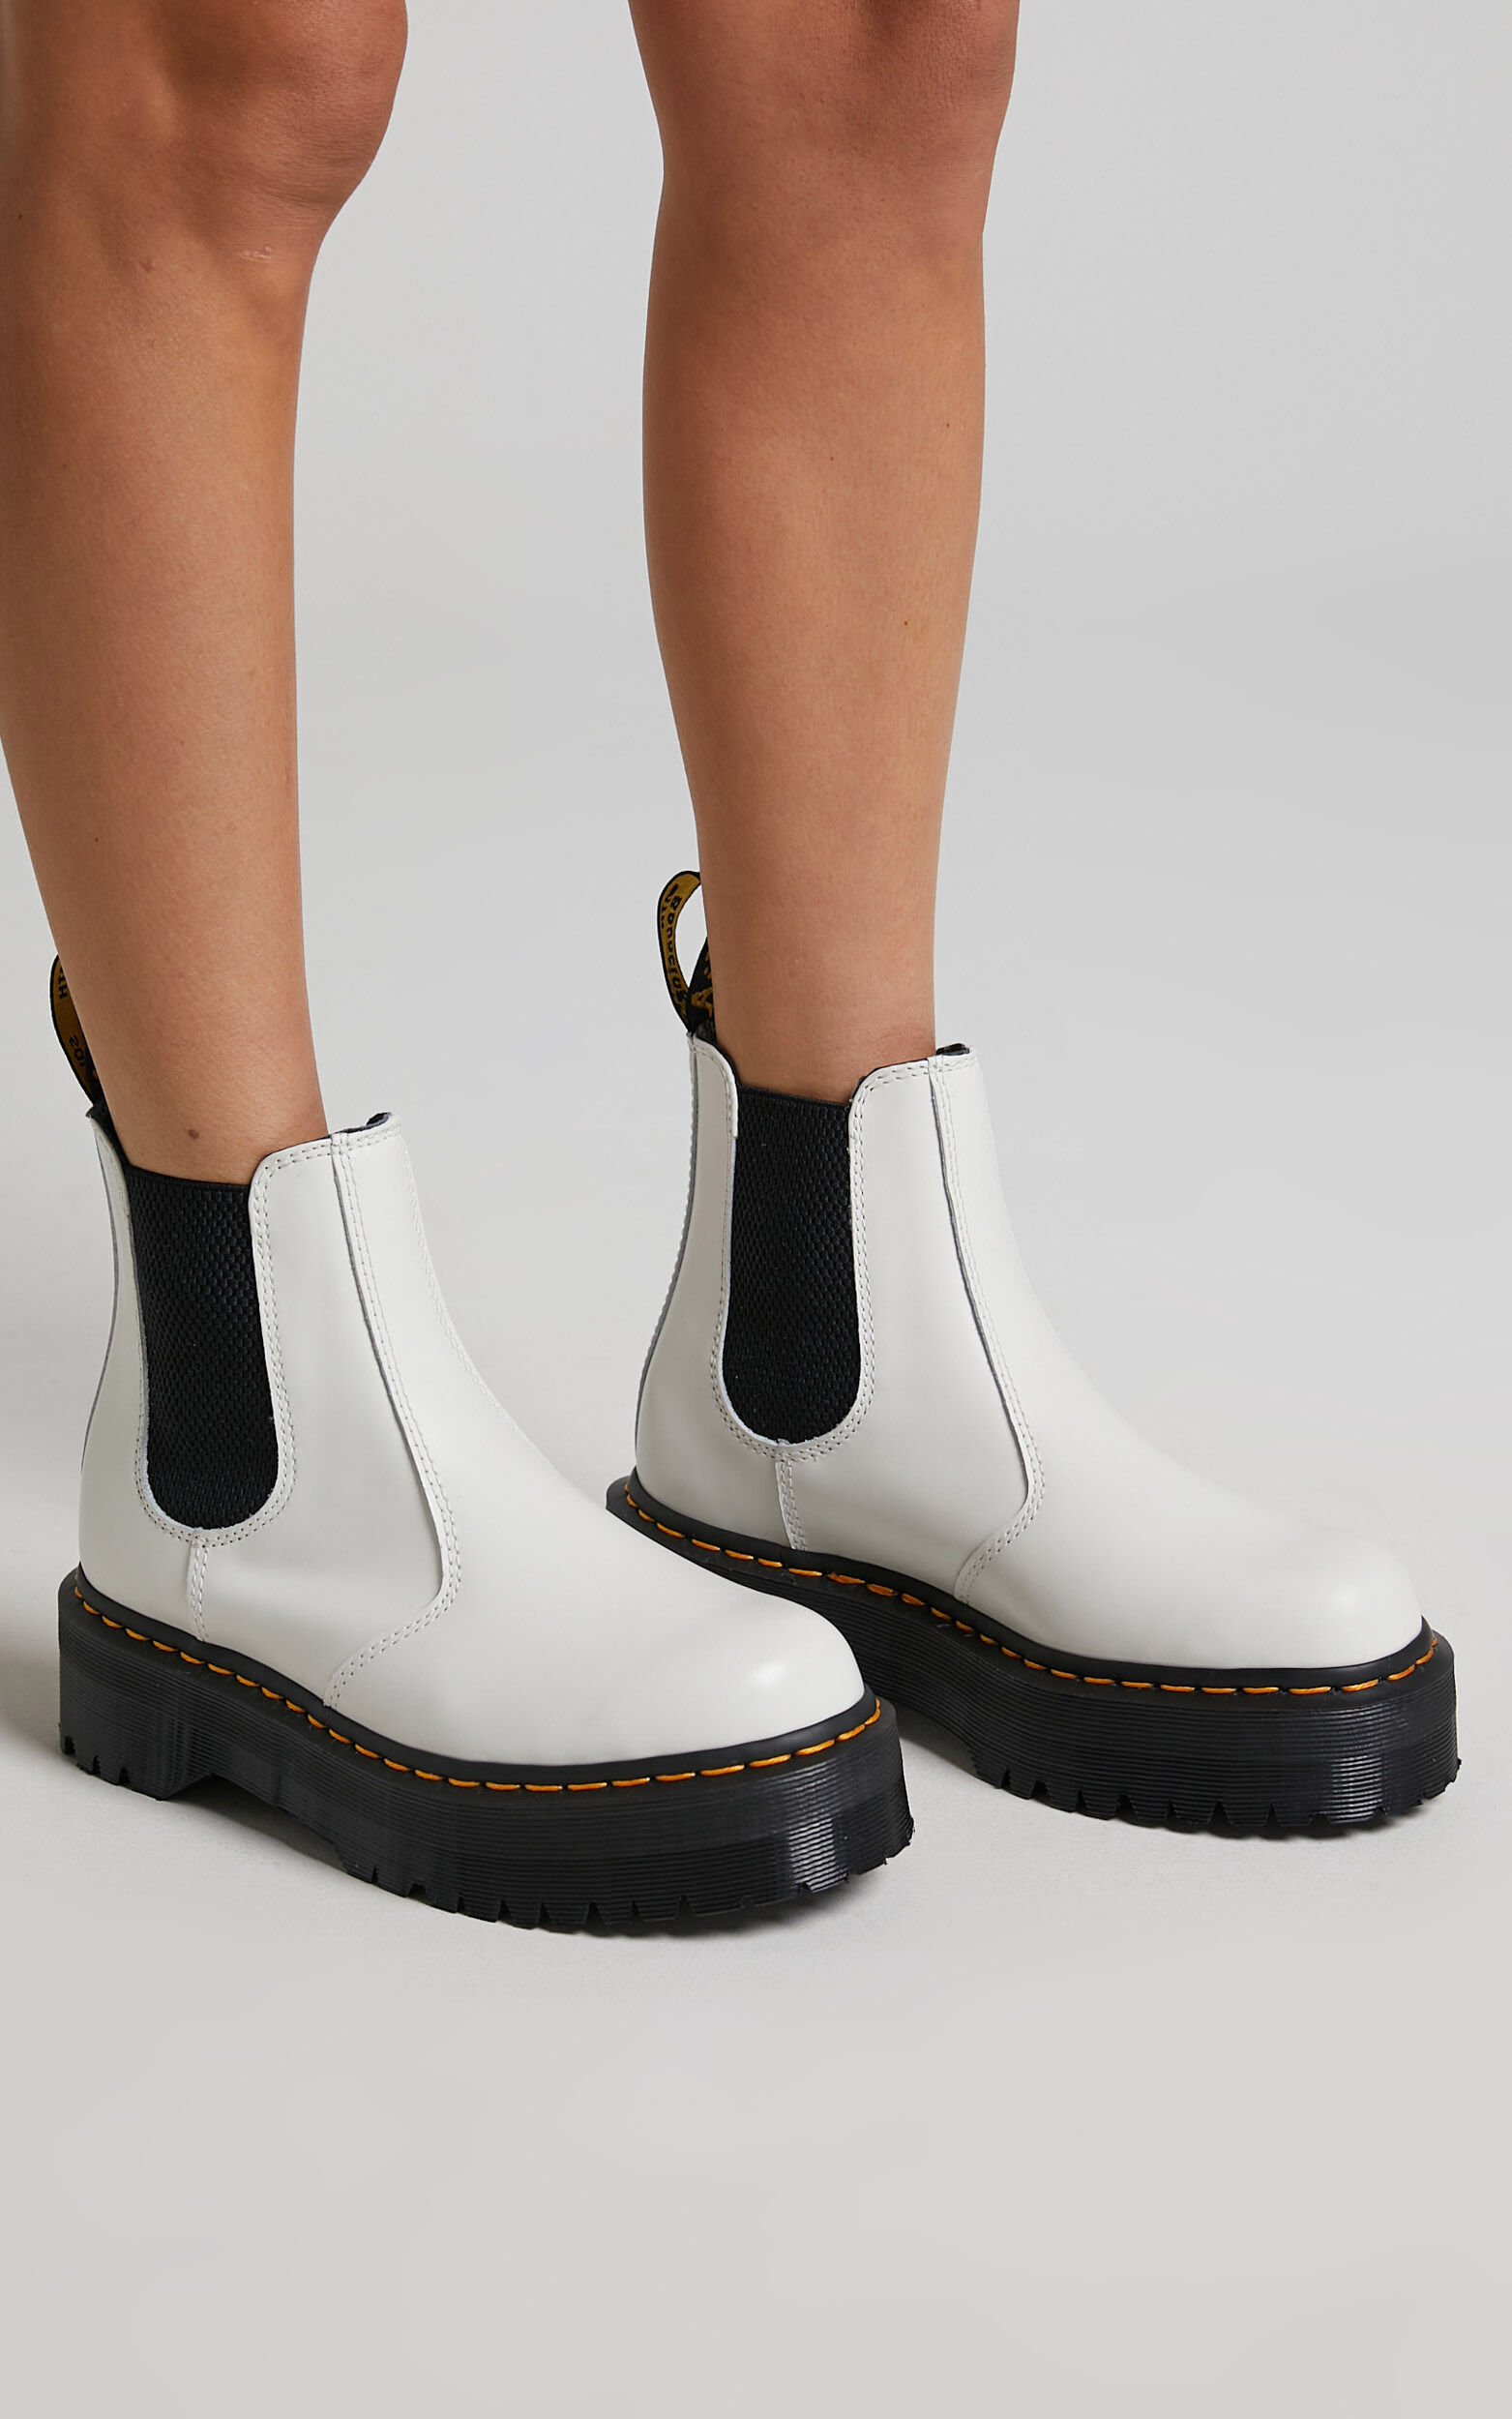 Dr. Martens - 2976 Quad Chelsea Boot in White Smooth - 05, WHT1